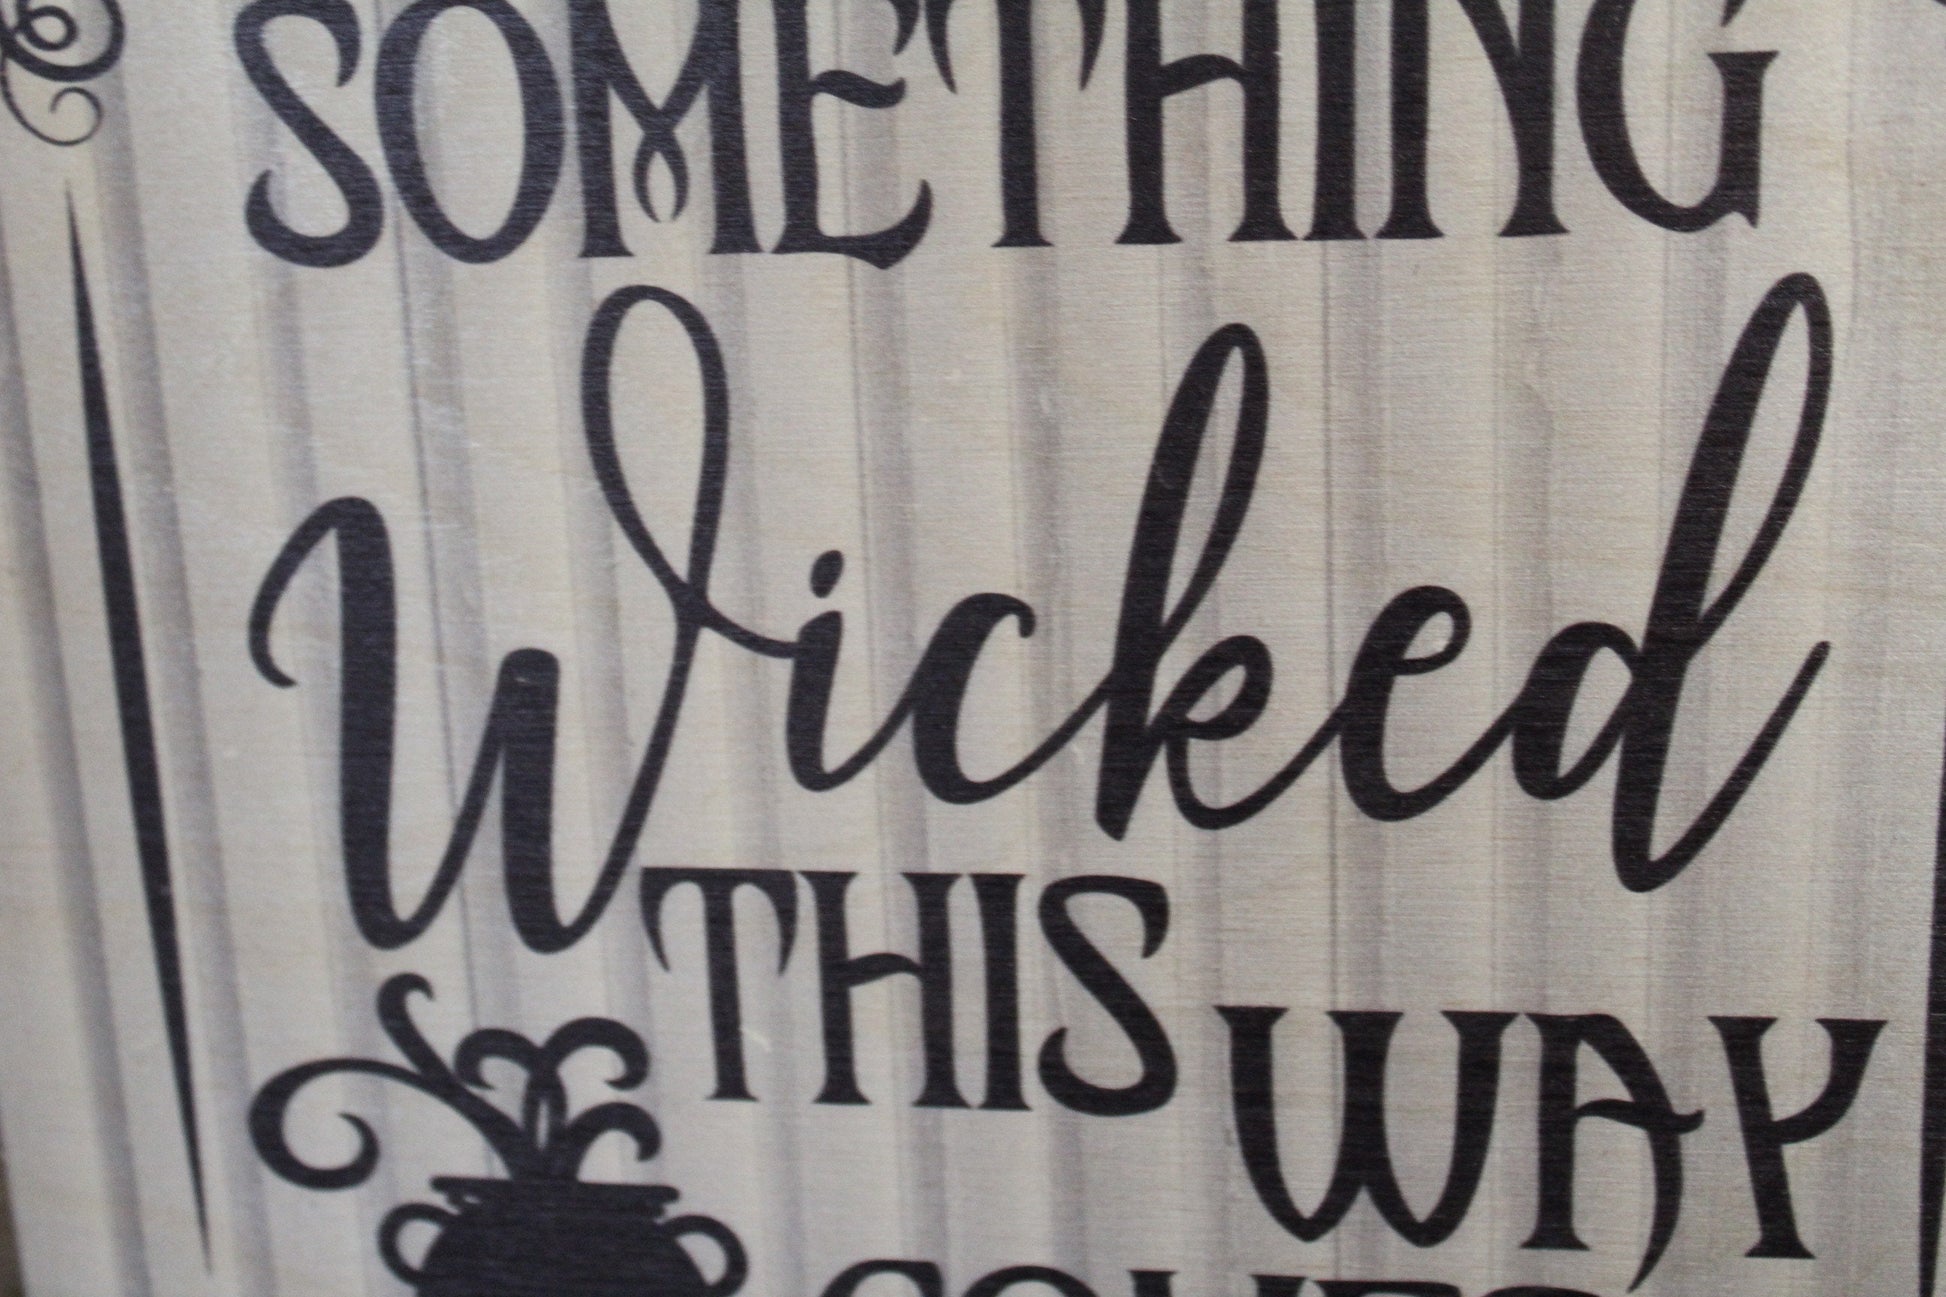 Wicked Halloween Wood Sign Something Wicked Comes This Way Shiplap Framed Brown Printed Art Farmhouse Primitive Rustic